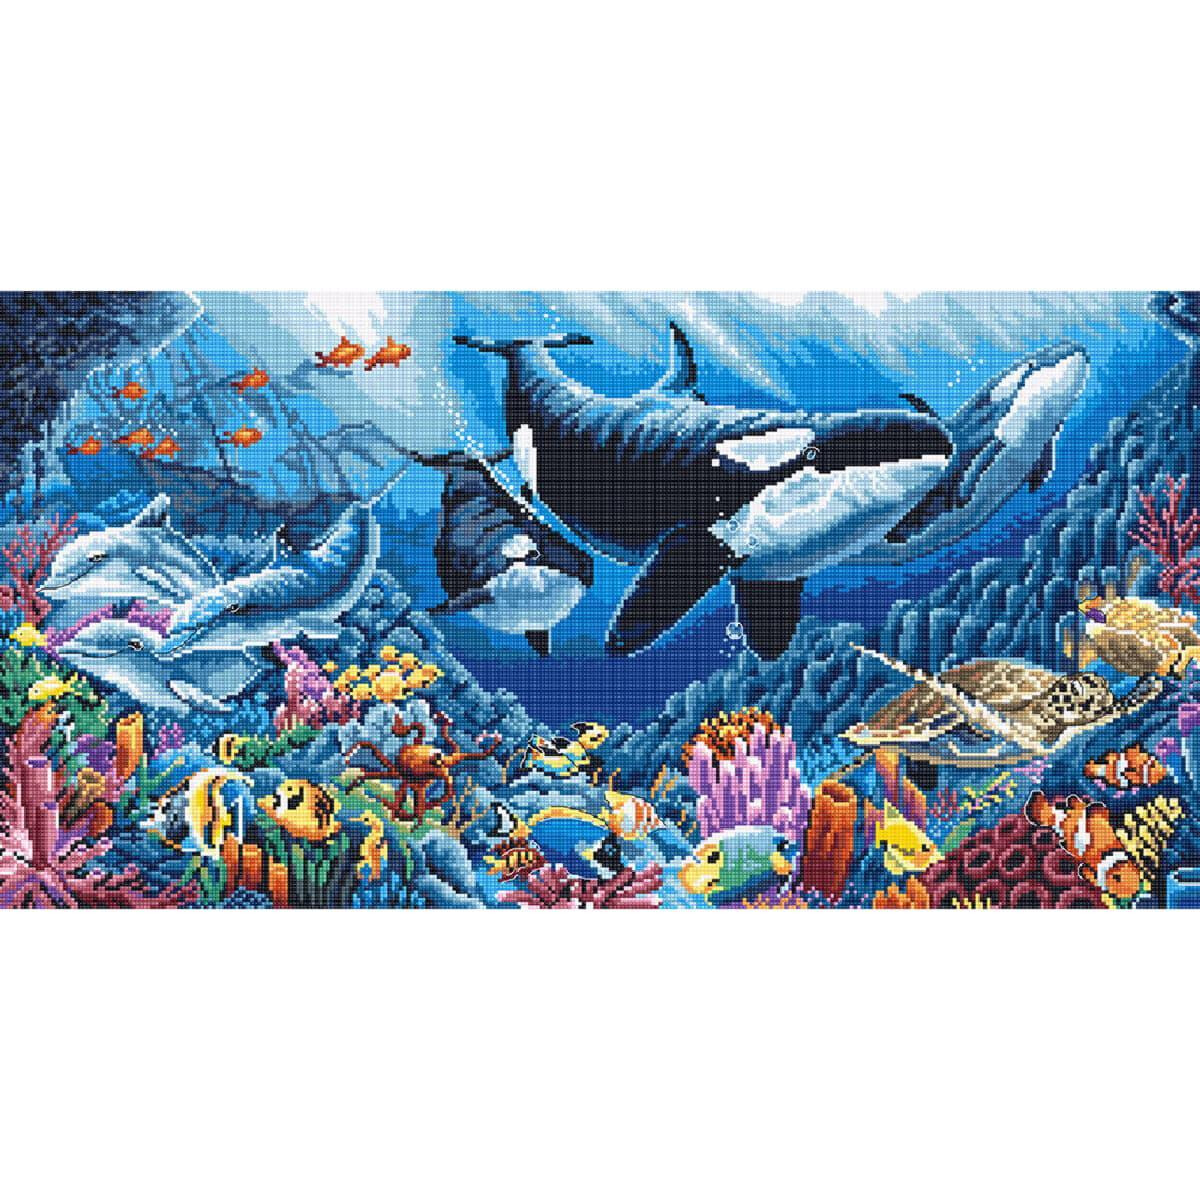 Letistitch counted cross stitch kit "Underwater...